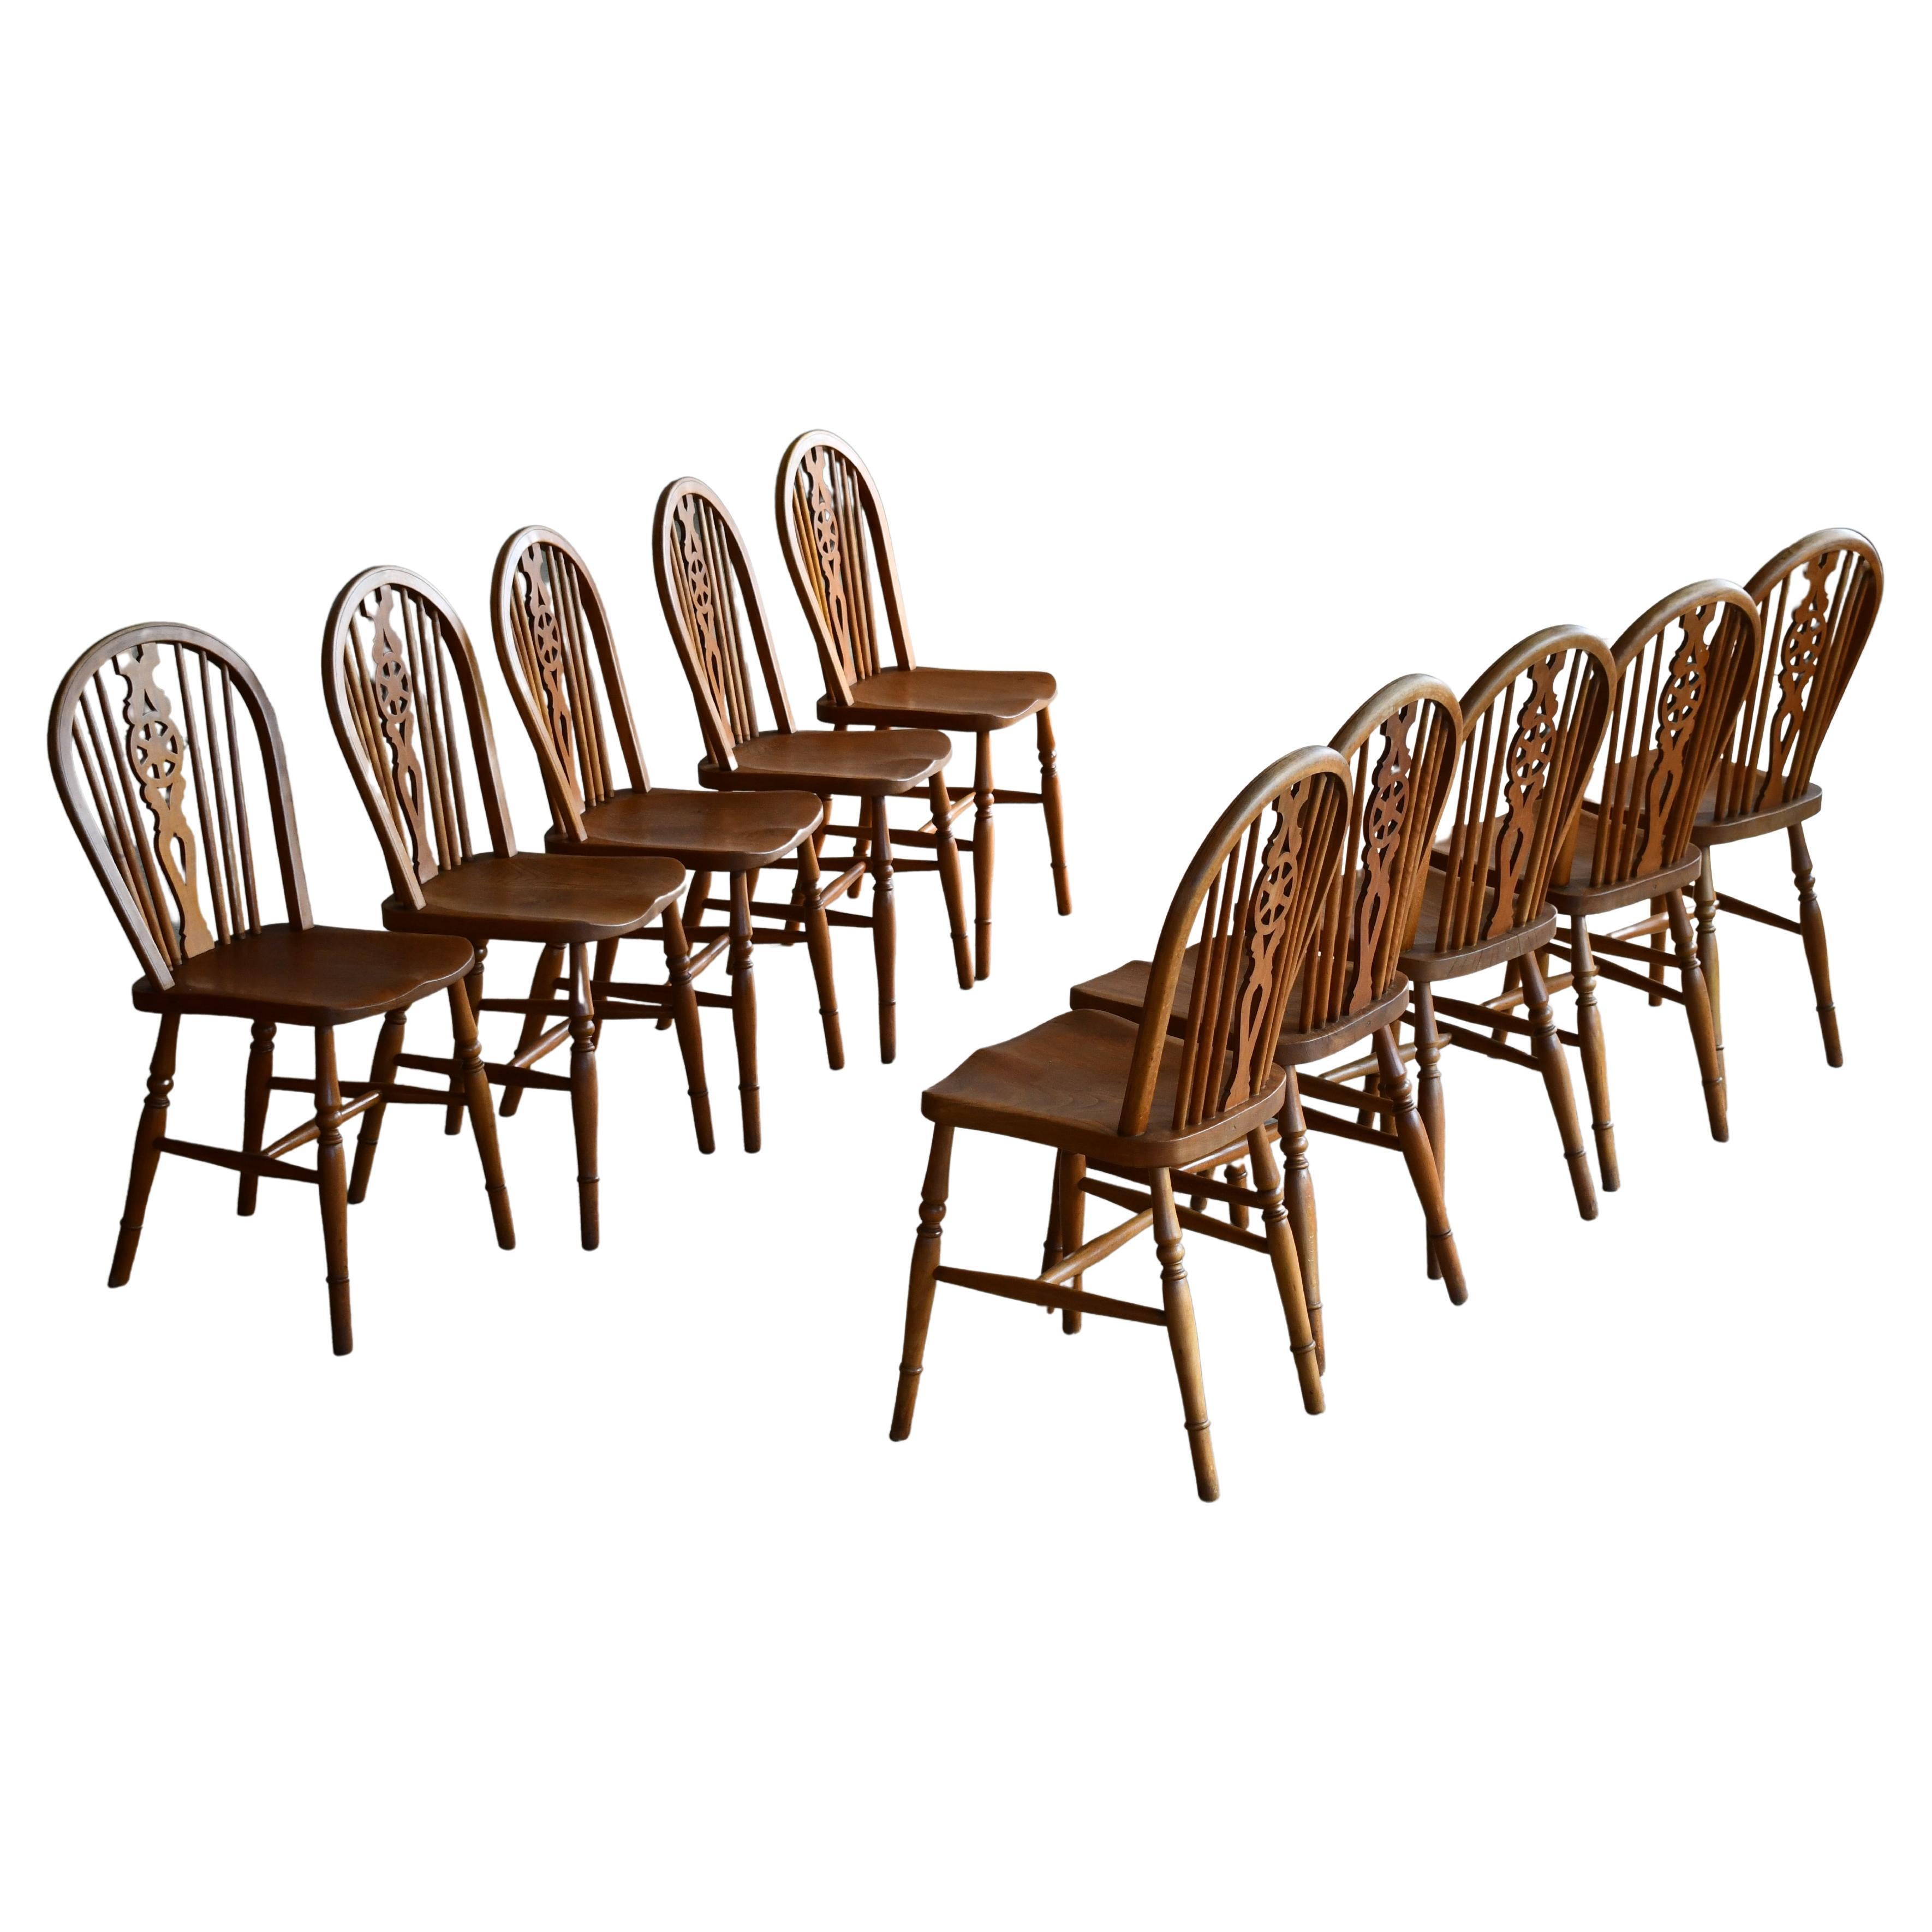 Set of Ten Danish Windsor Style Dining Chairs, Early to Mid-1900s